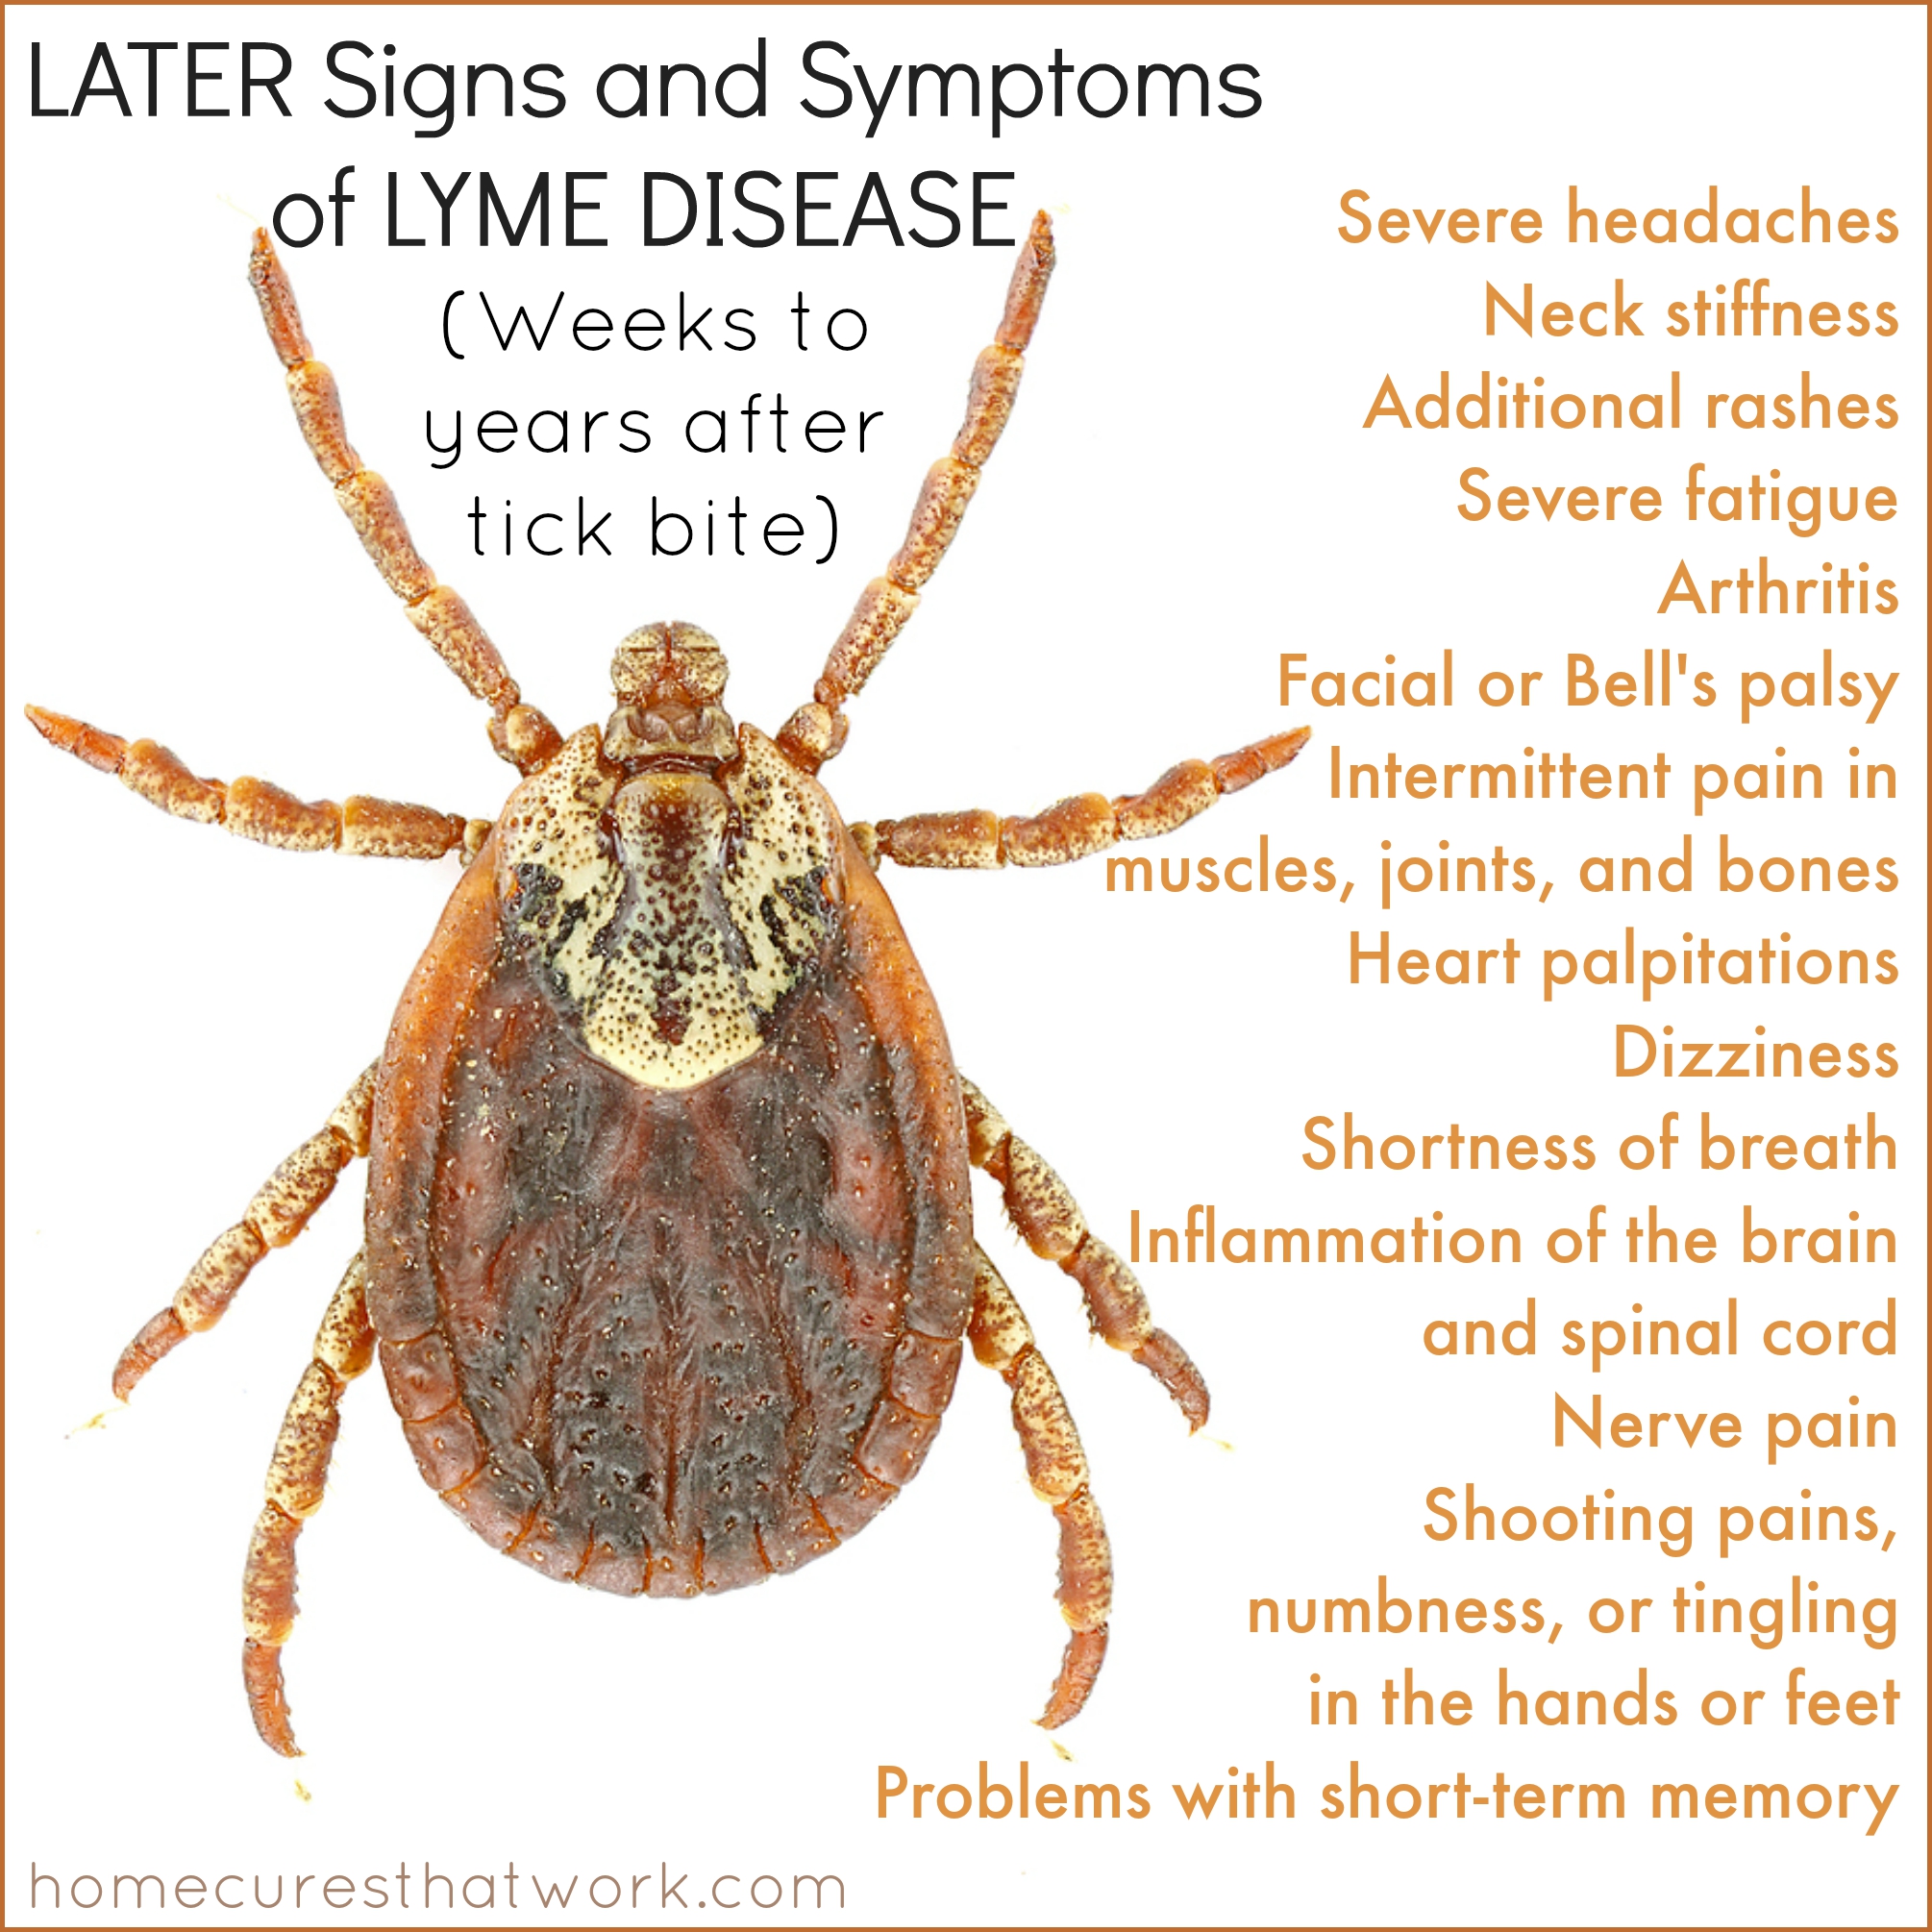 Later signs and symptoms of Lyme disease